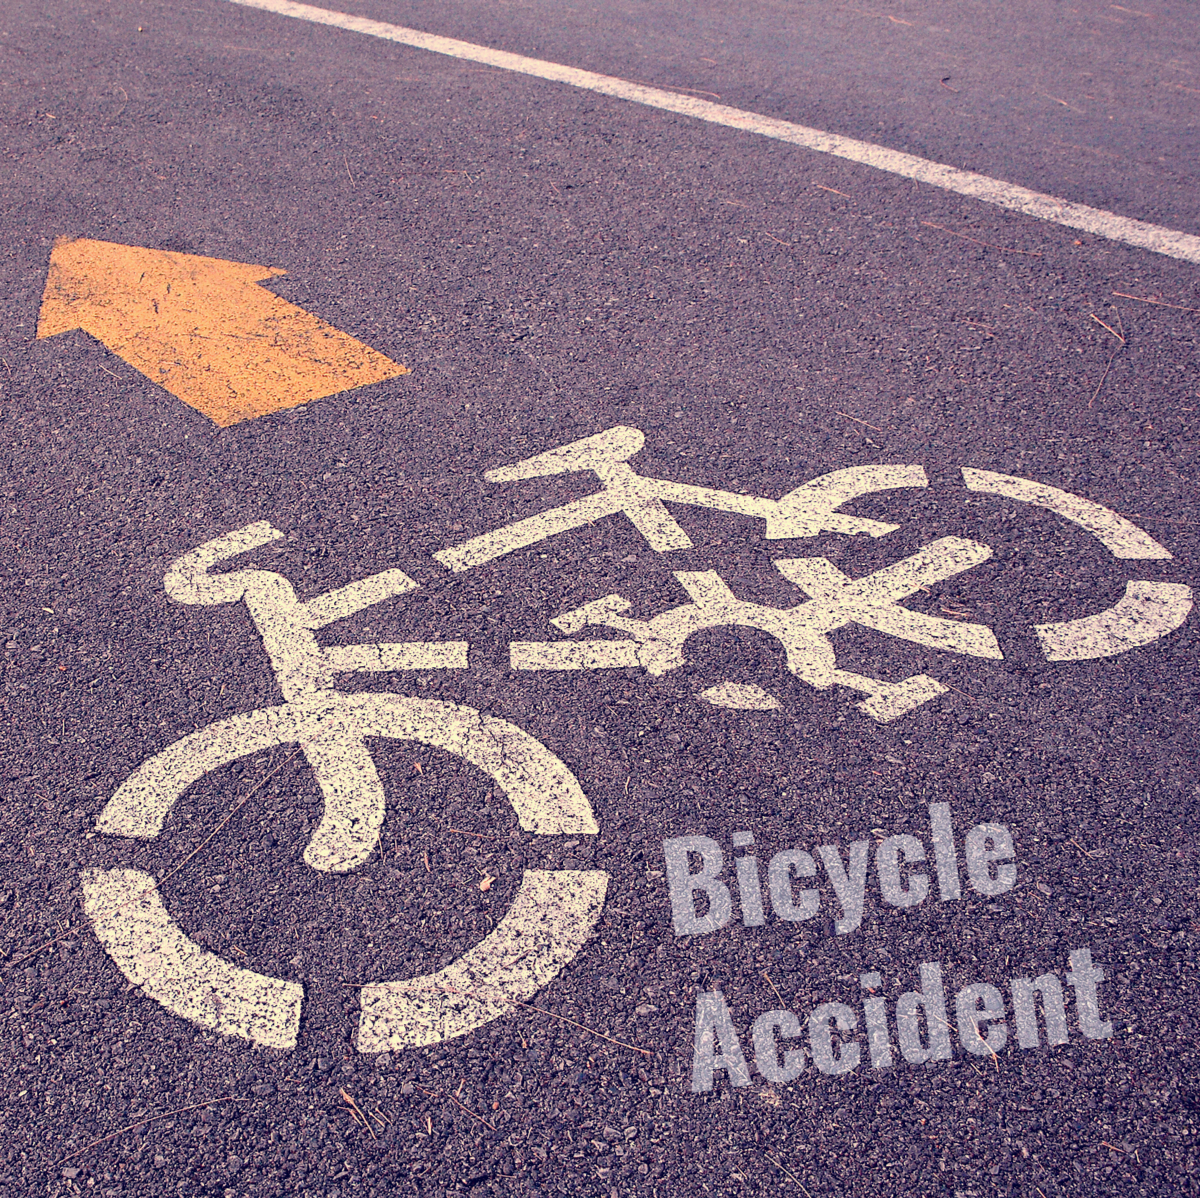 Stockton Bicycle Accident Munford Avenue and Mariposa Road